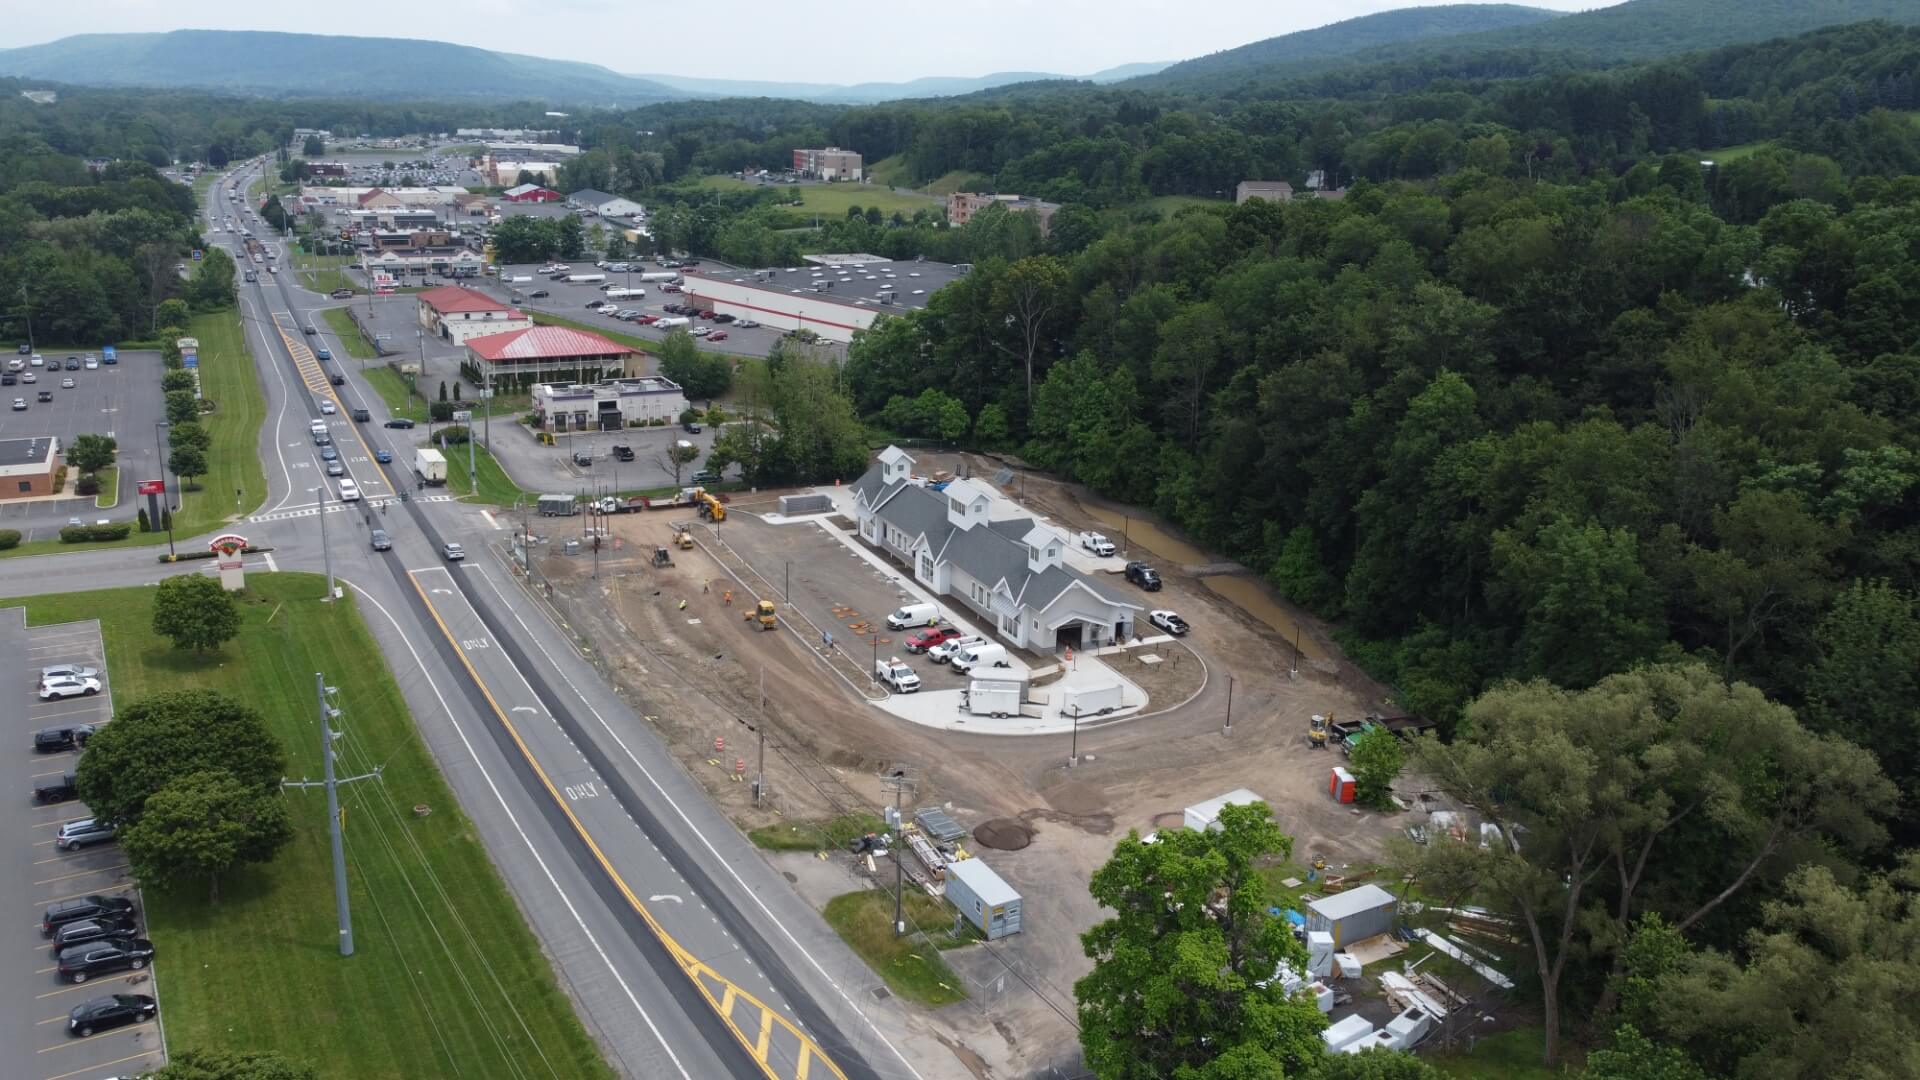 Drone photo of the Hoffman Car Wash Oneonta location under construction